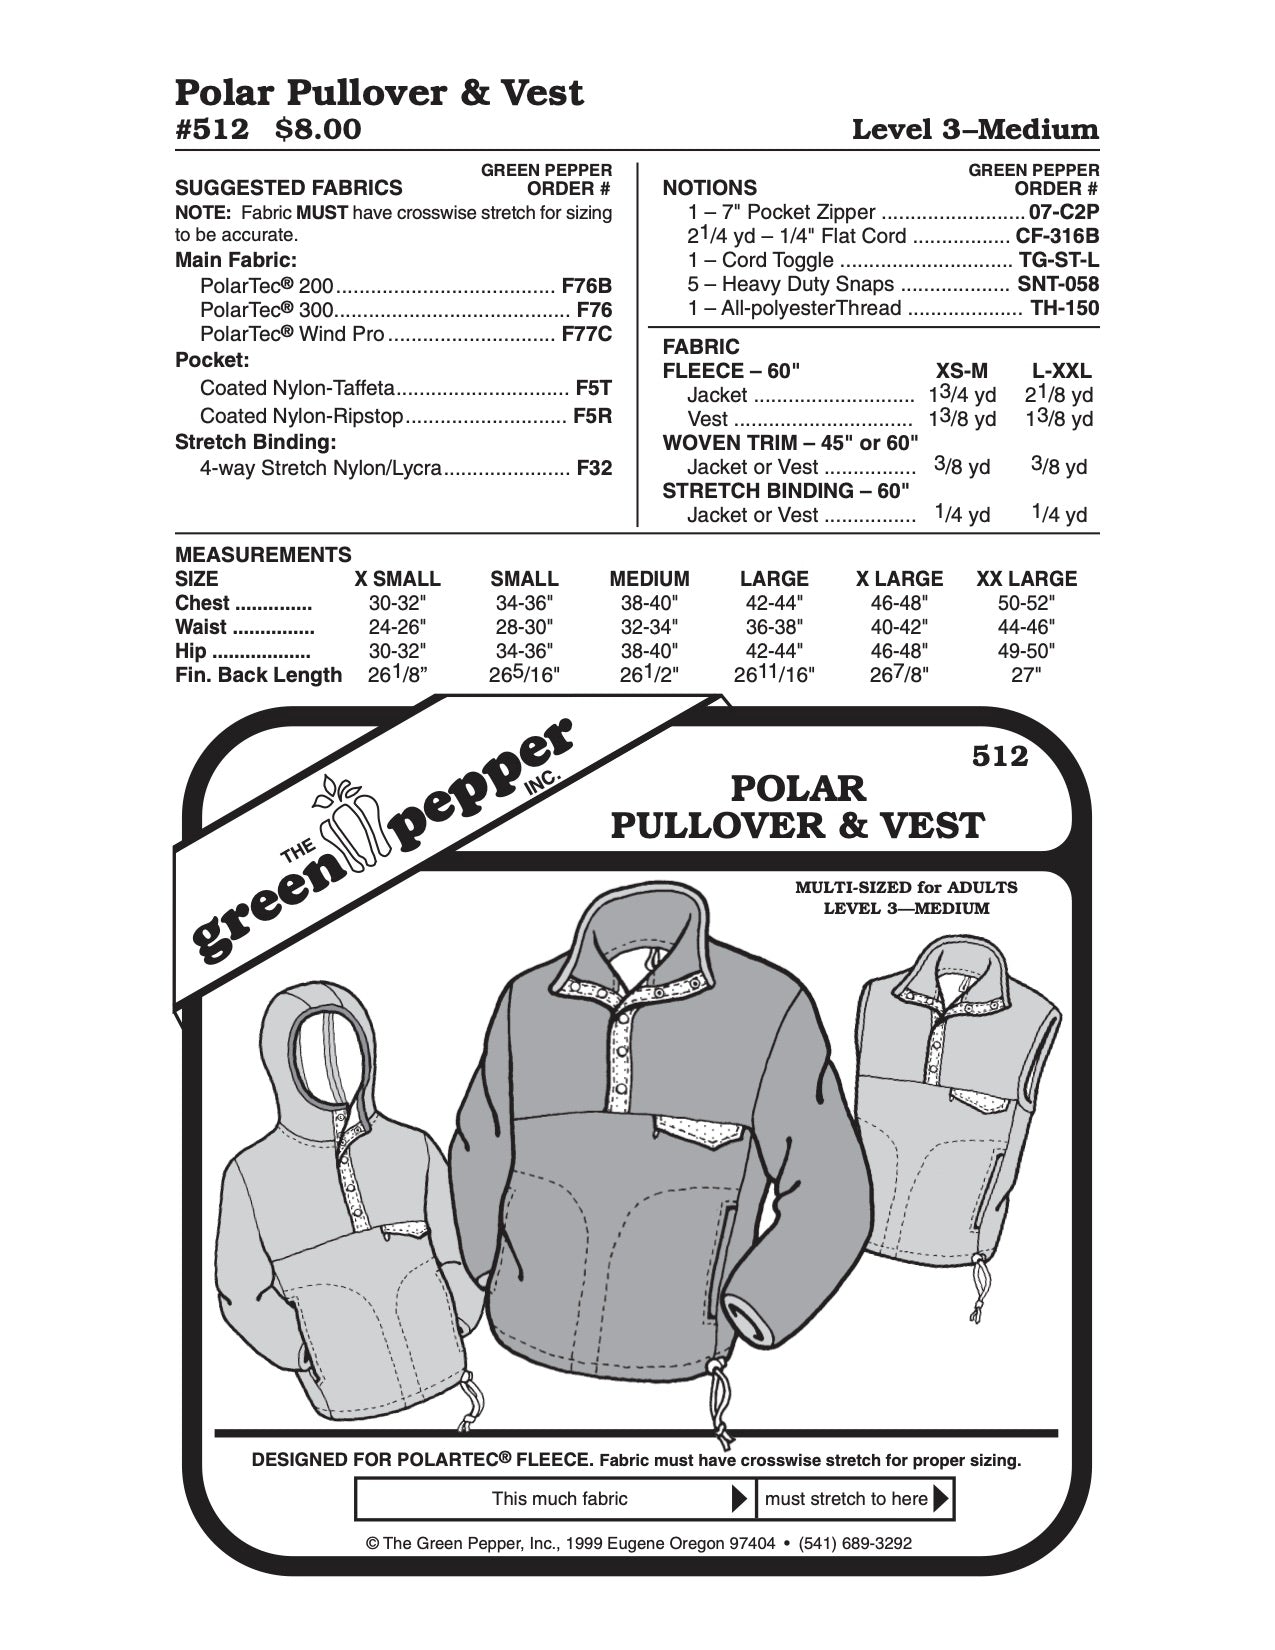 Adult’s Polar Pullover & Vest - 512 - The Green Pepper Patterns